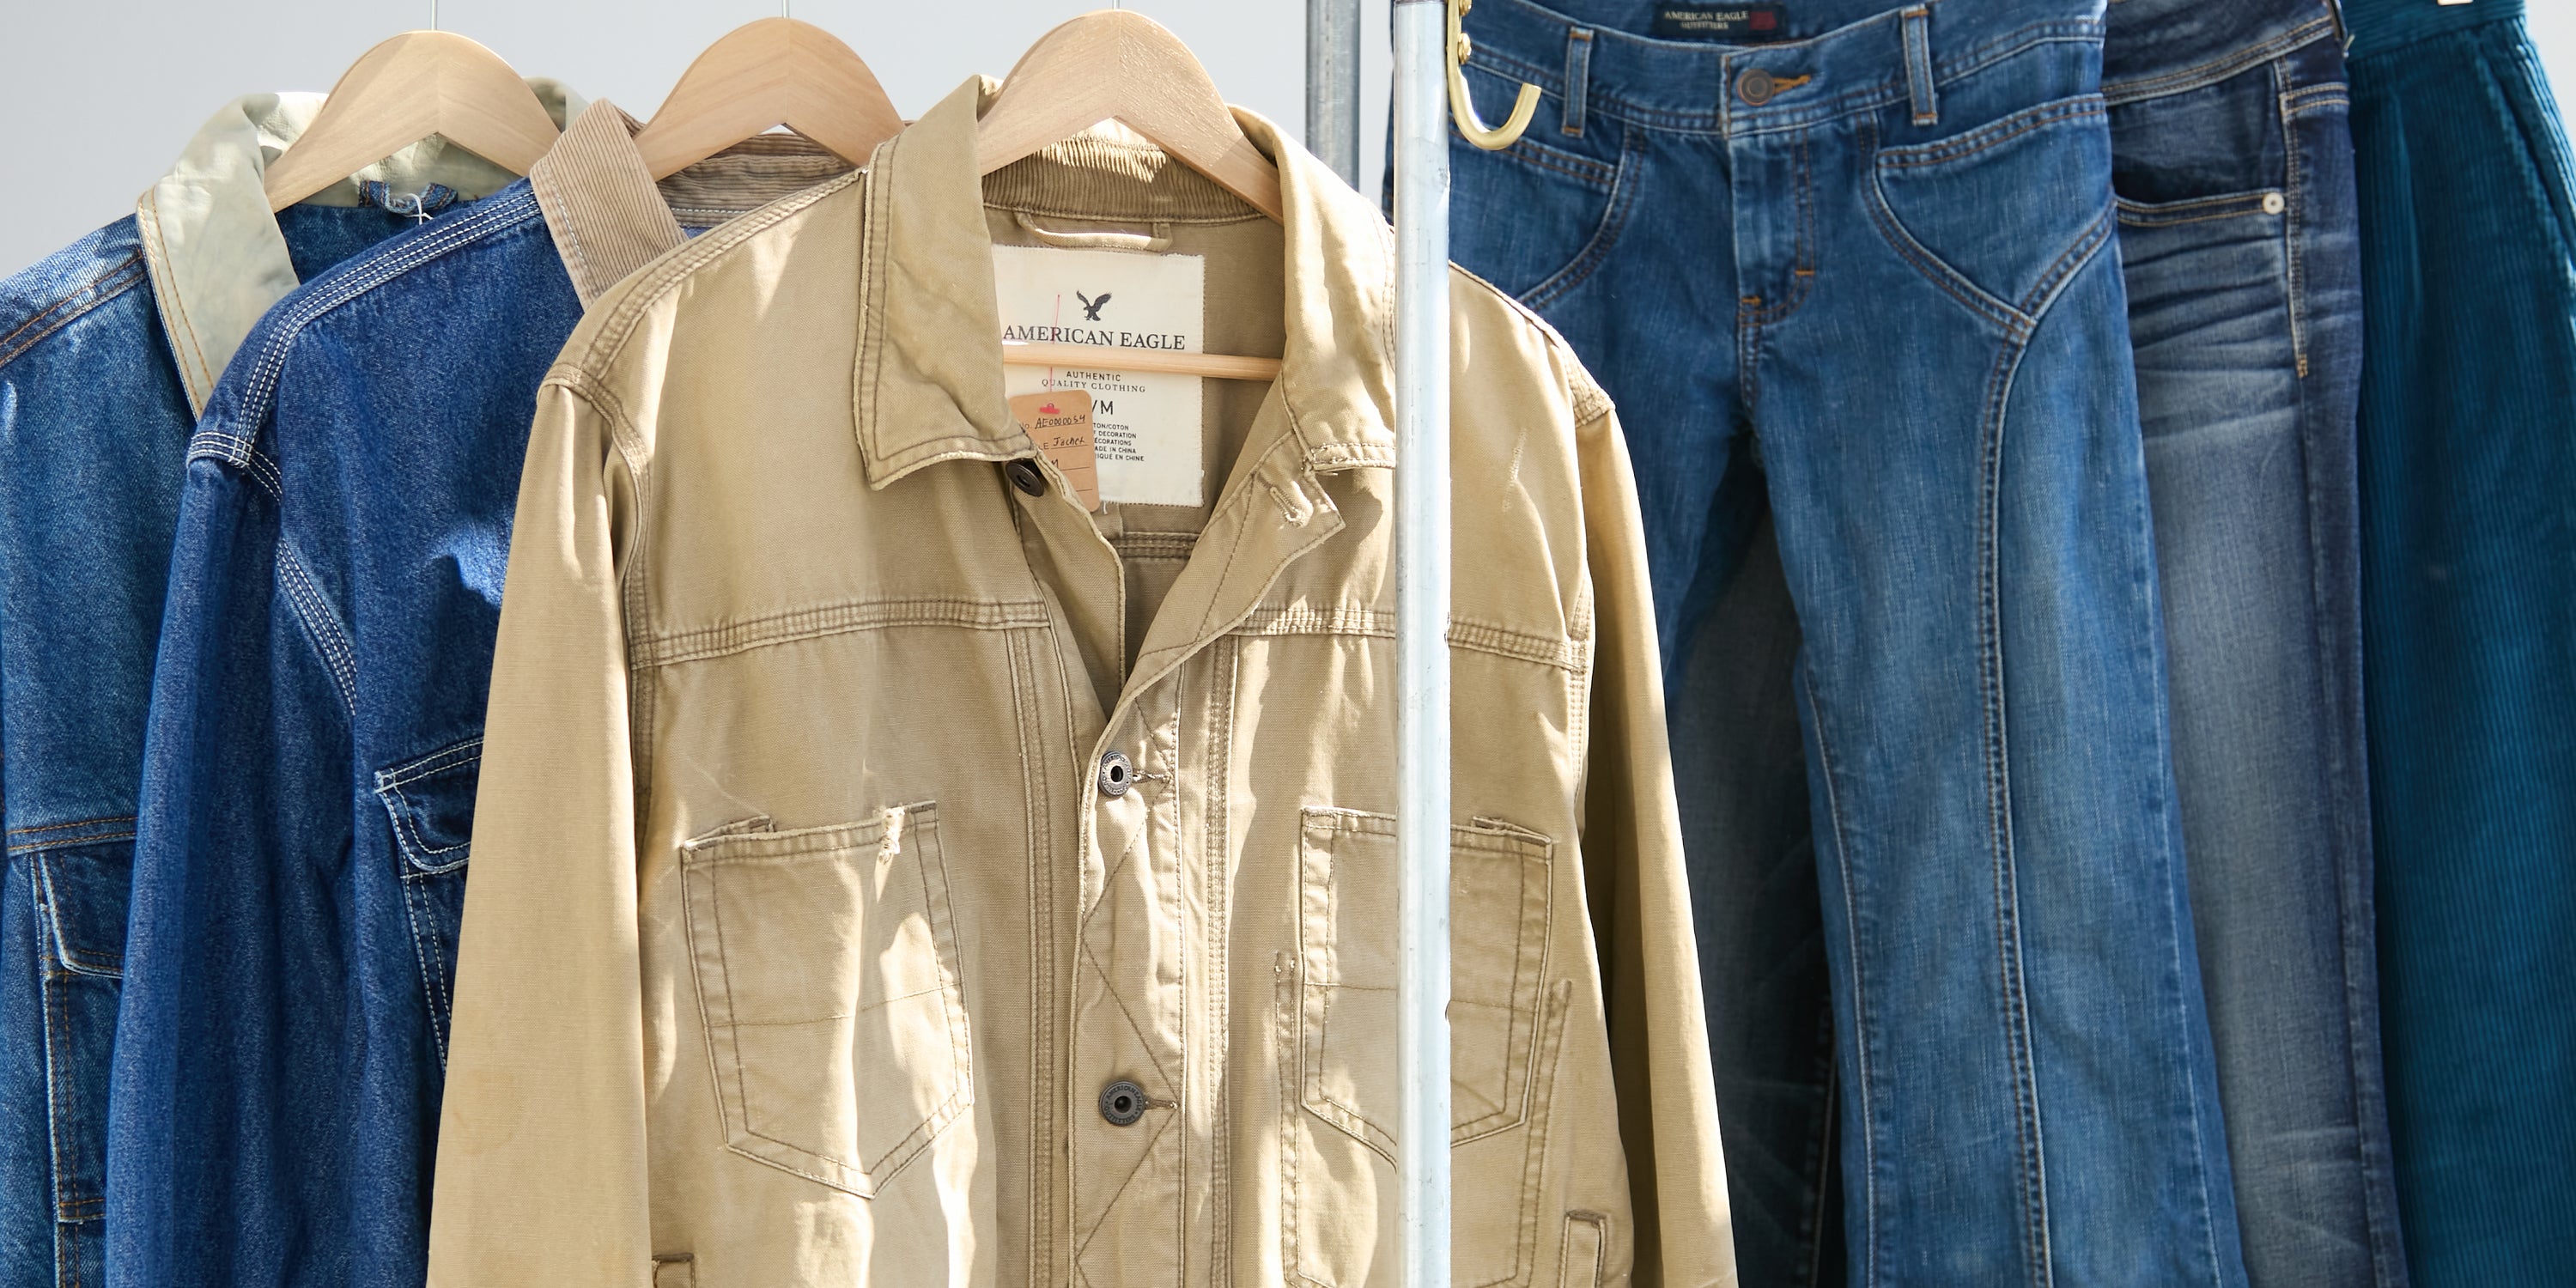 American Eagle Vintage garmets: two denim jackets, one khaki jacket, and three pairs of jeans.